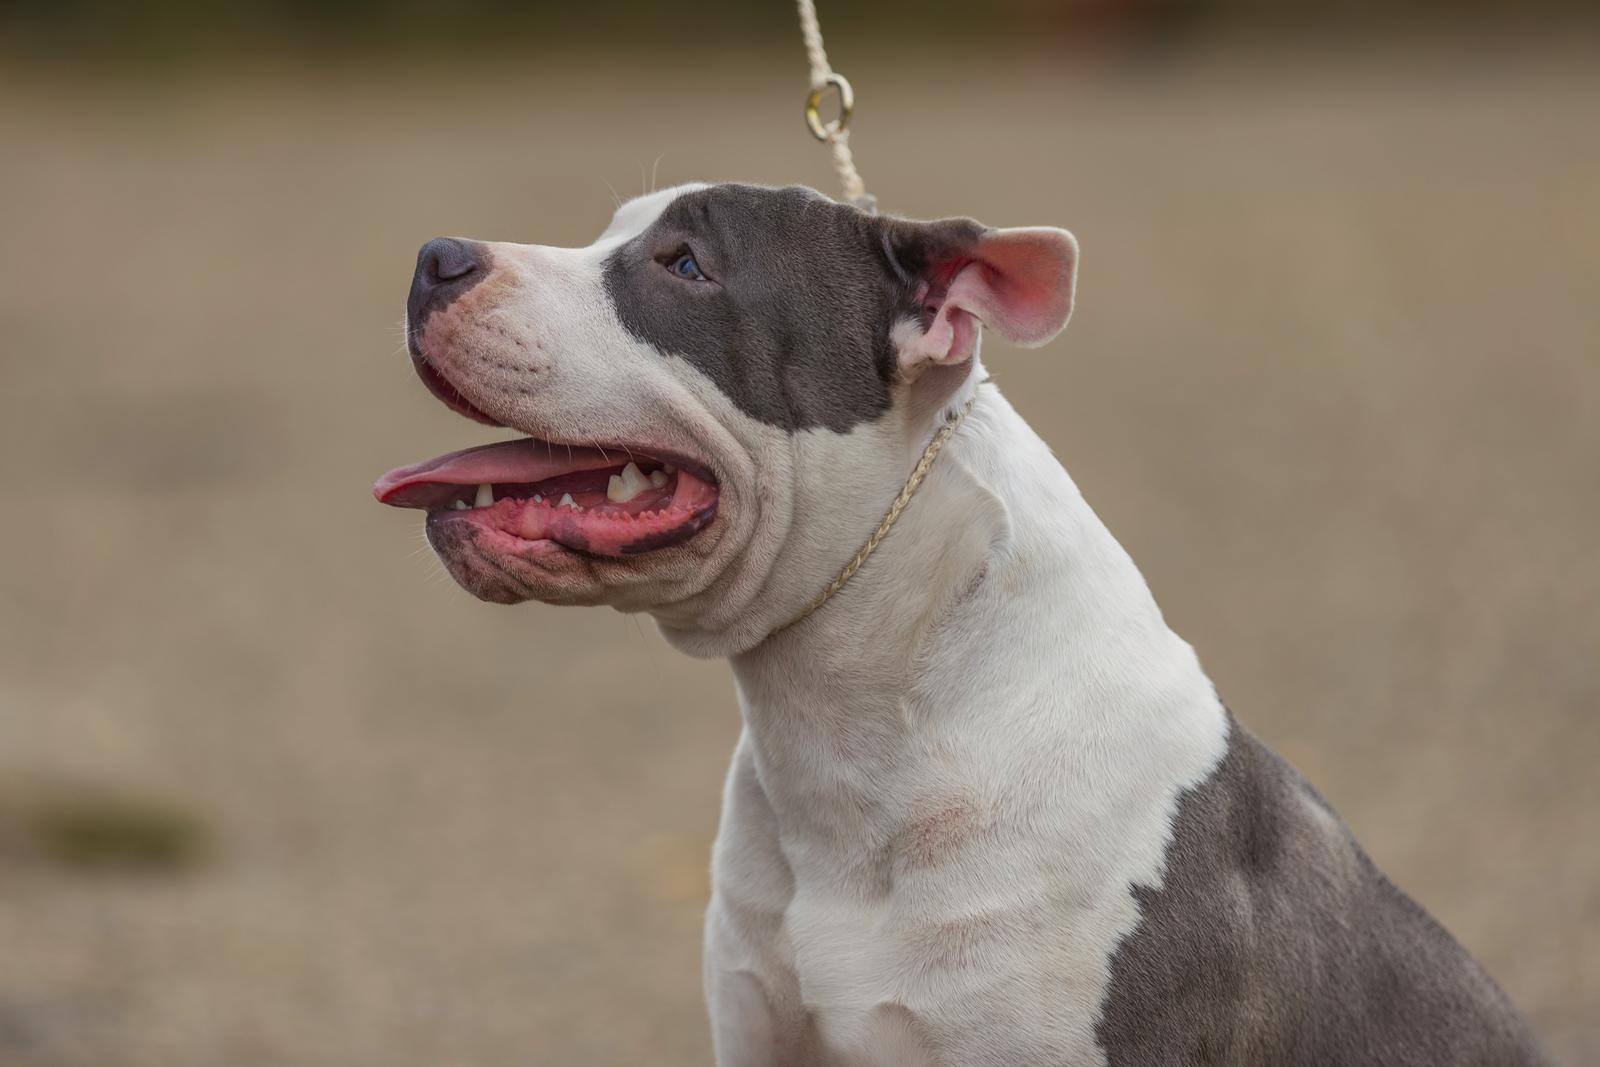 Where are pitbulls banned?